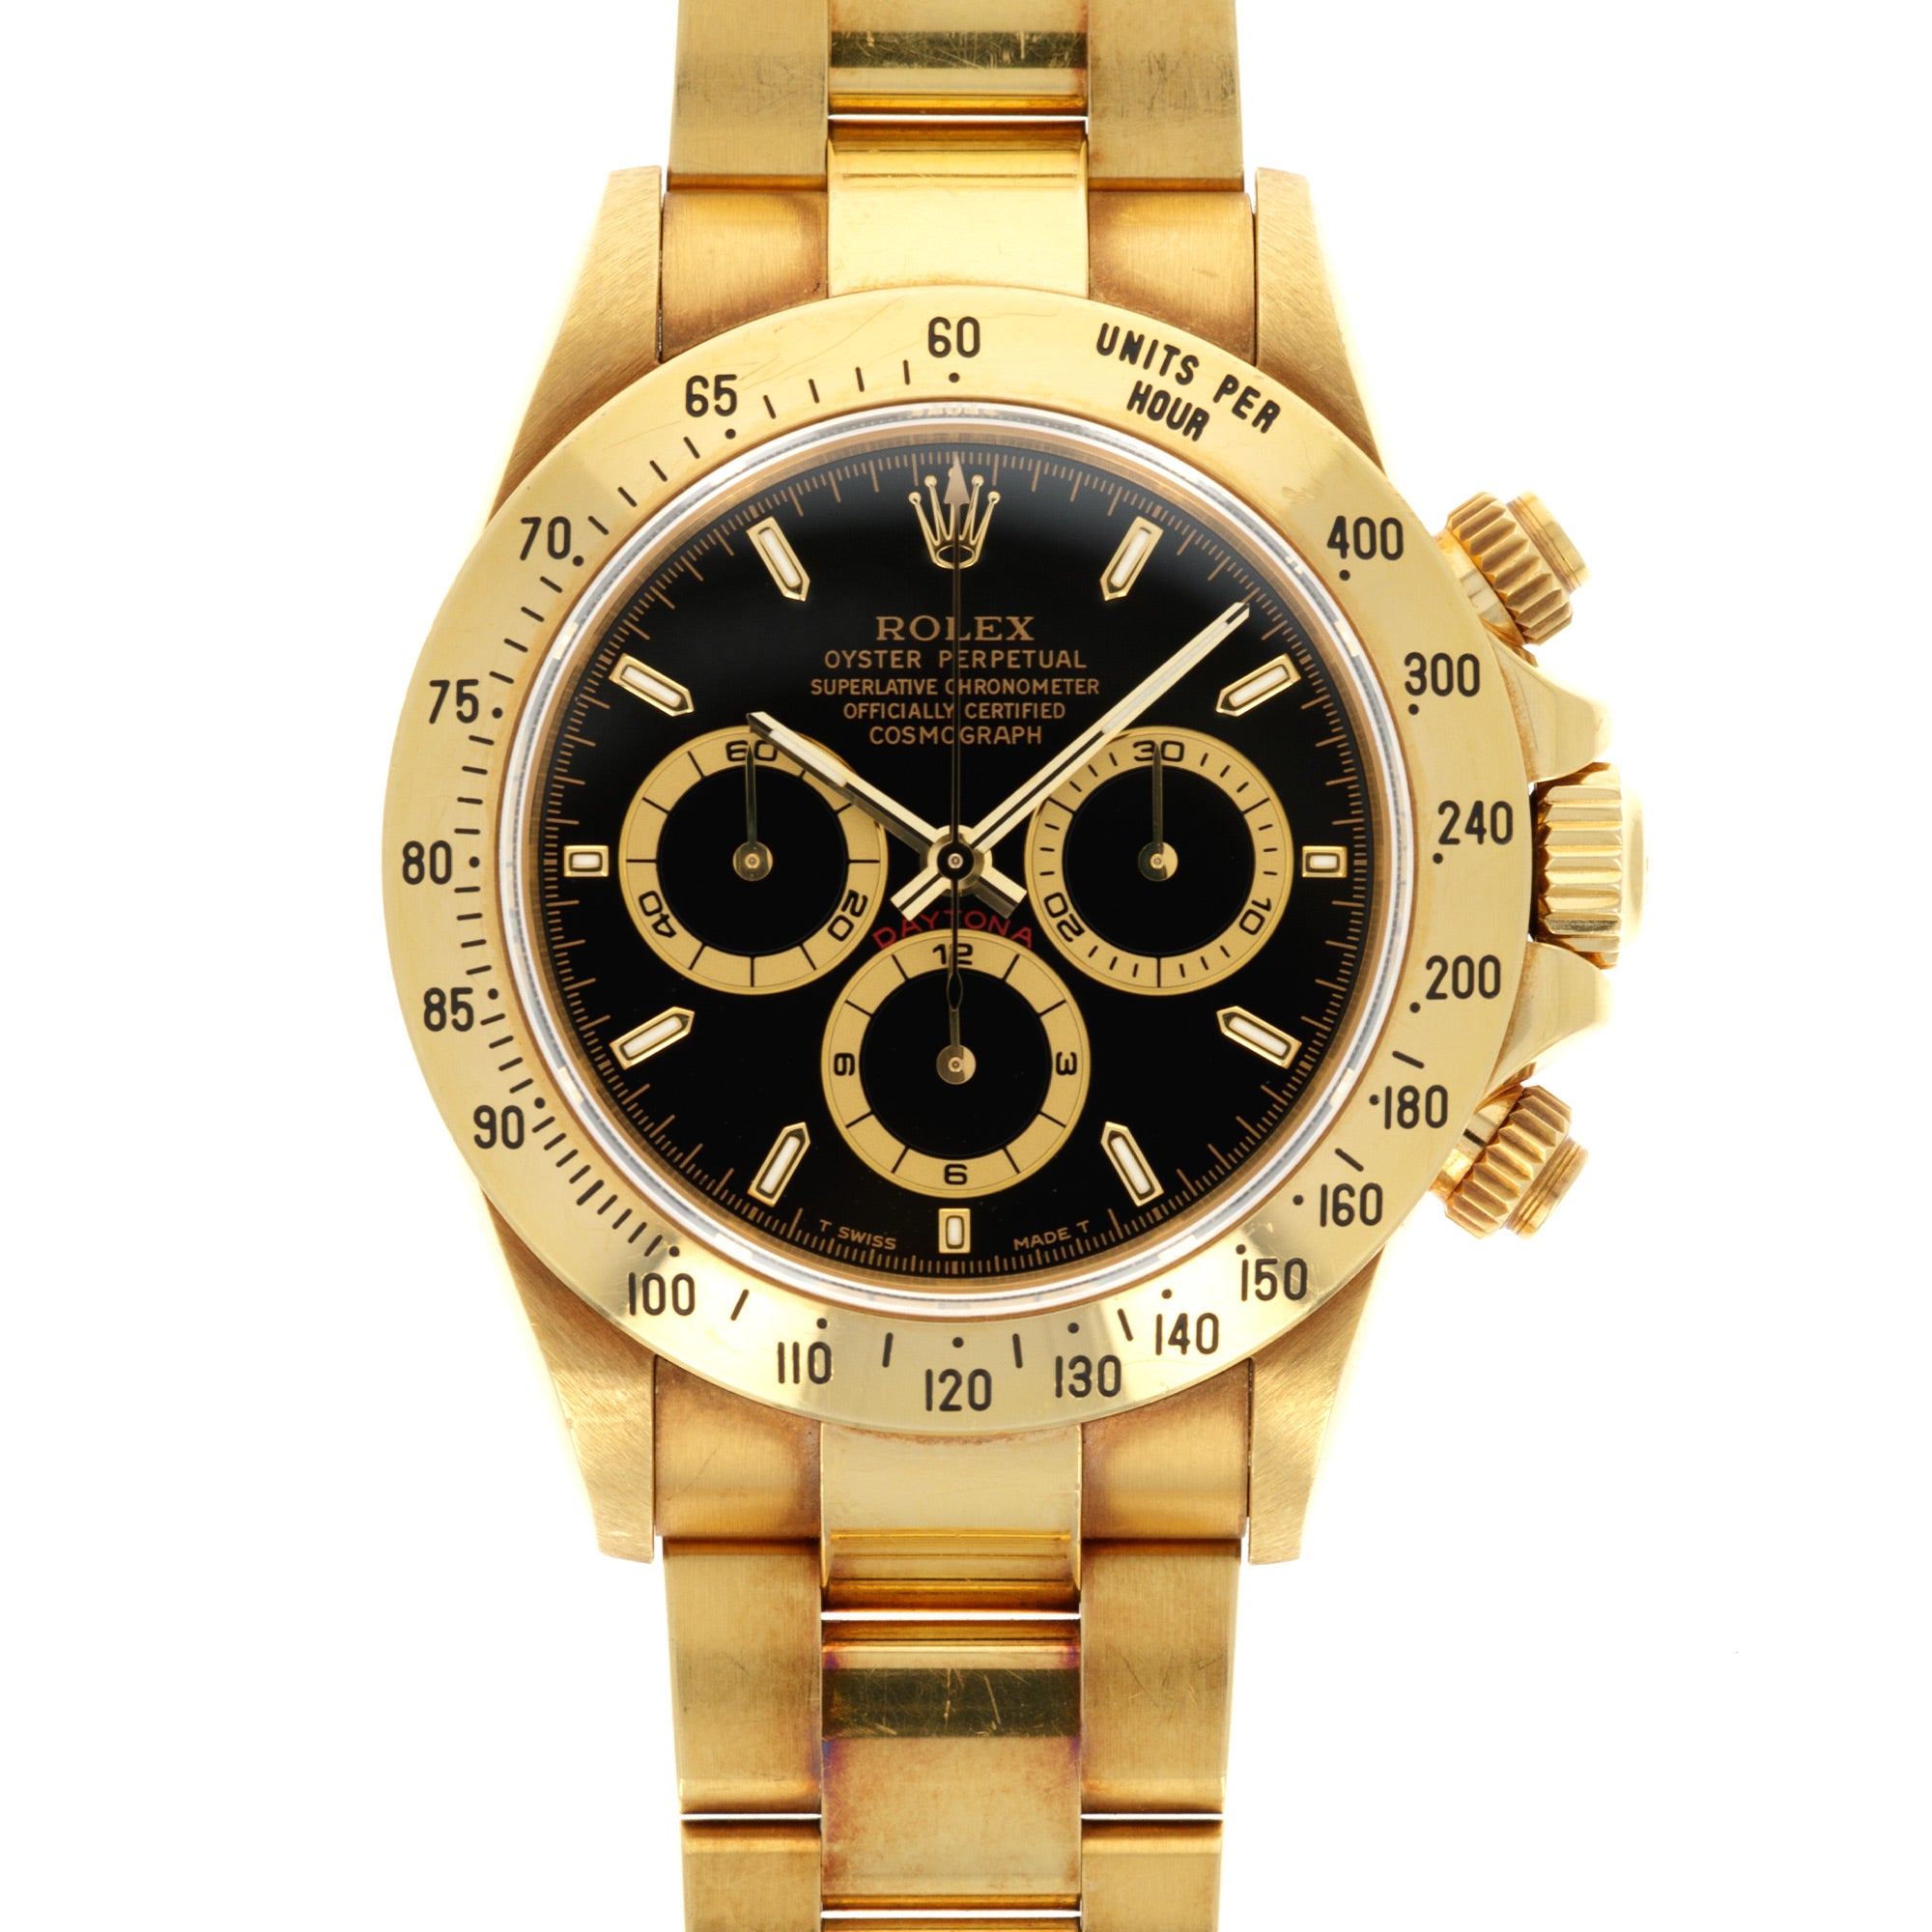 Rolex - Rolex Yellow Gold Cosmograph Daytona Ref. 16528 in Superb Condition - The Keystone Watches